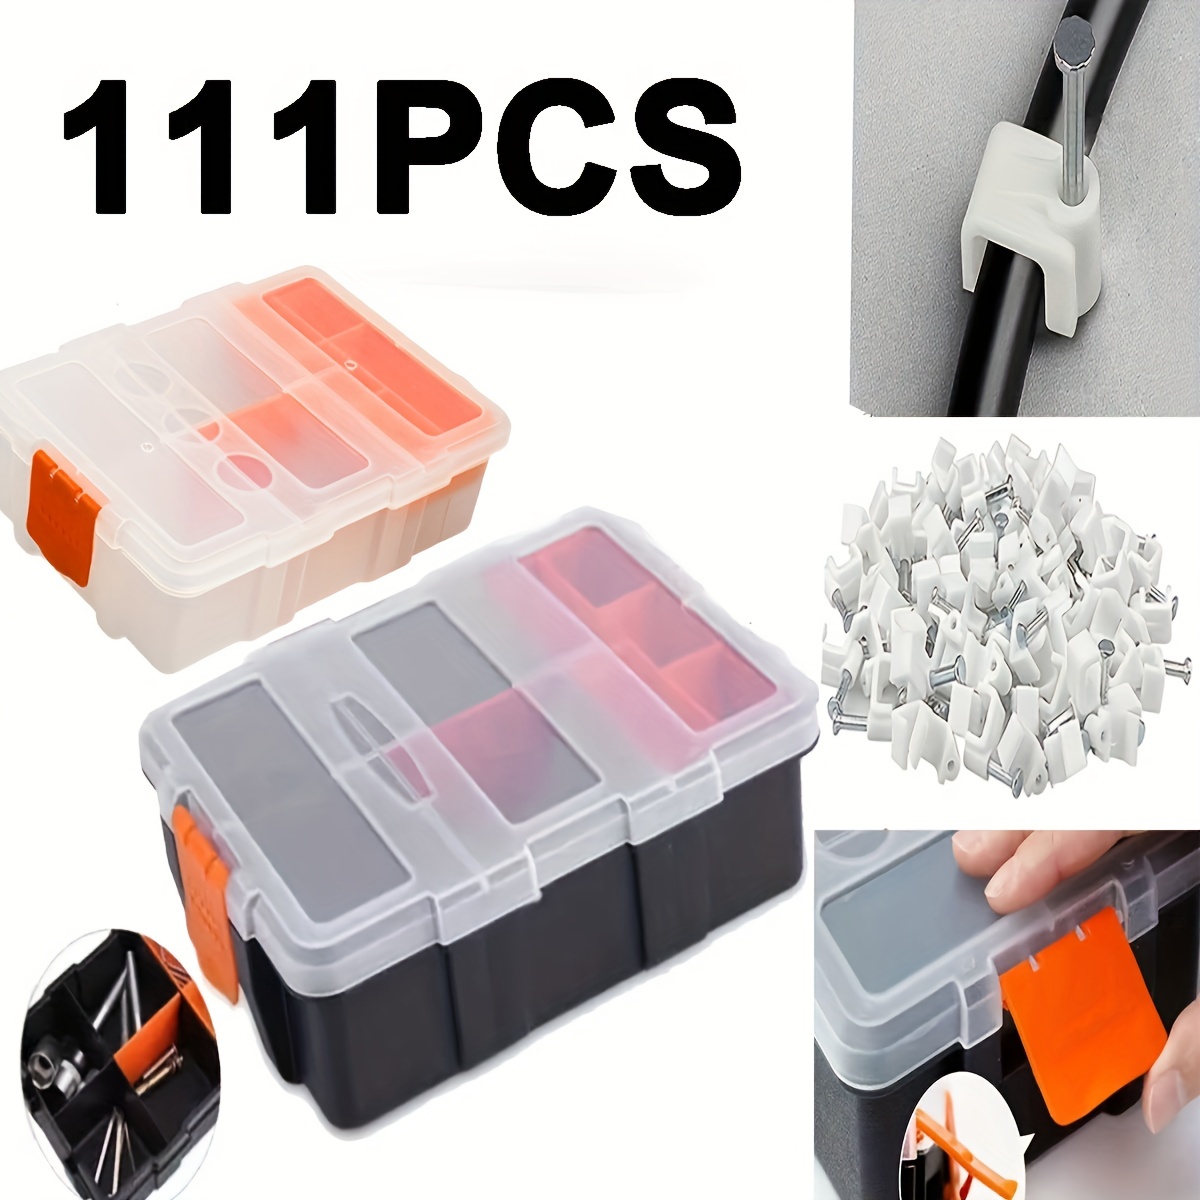 Andalus Screw Organizer with 18 Compartments & Removable Dividers, Screw Organizer Box Offers Easy Portability & Simplifies Storage of Hardware